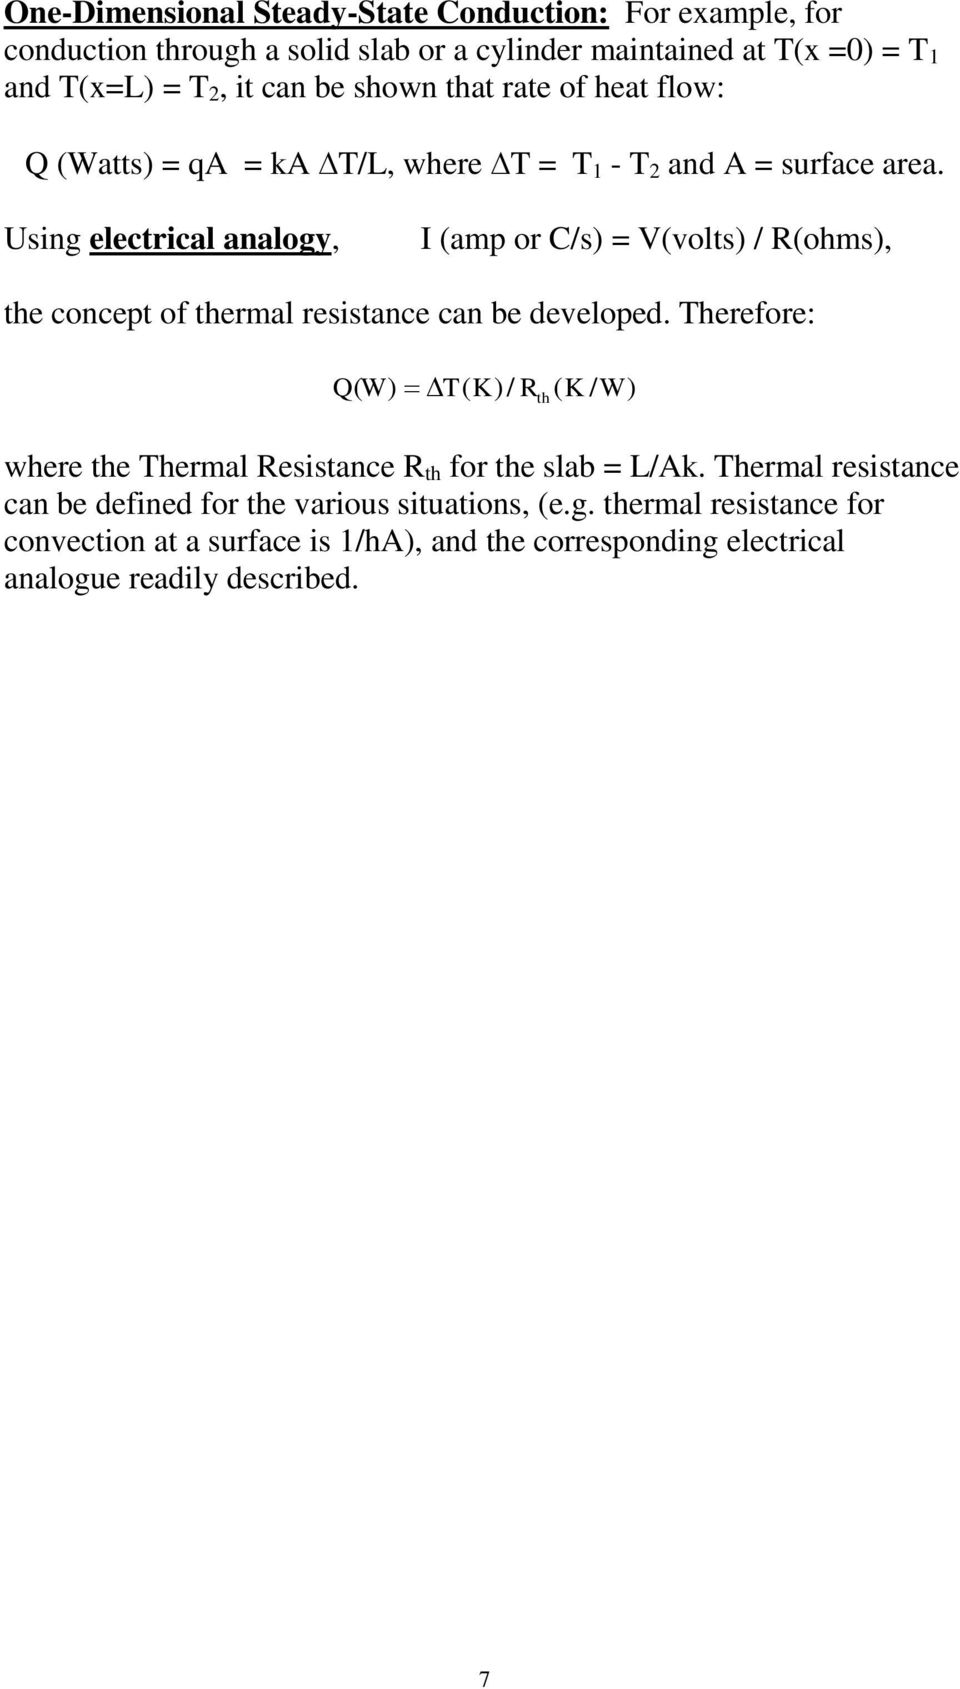 Using electrical analogy, I (amp or C/s) = V(volts) / R(ohms), the concept of thermal resistance can be developed.